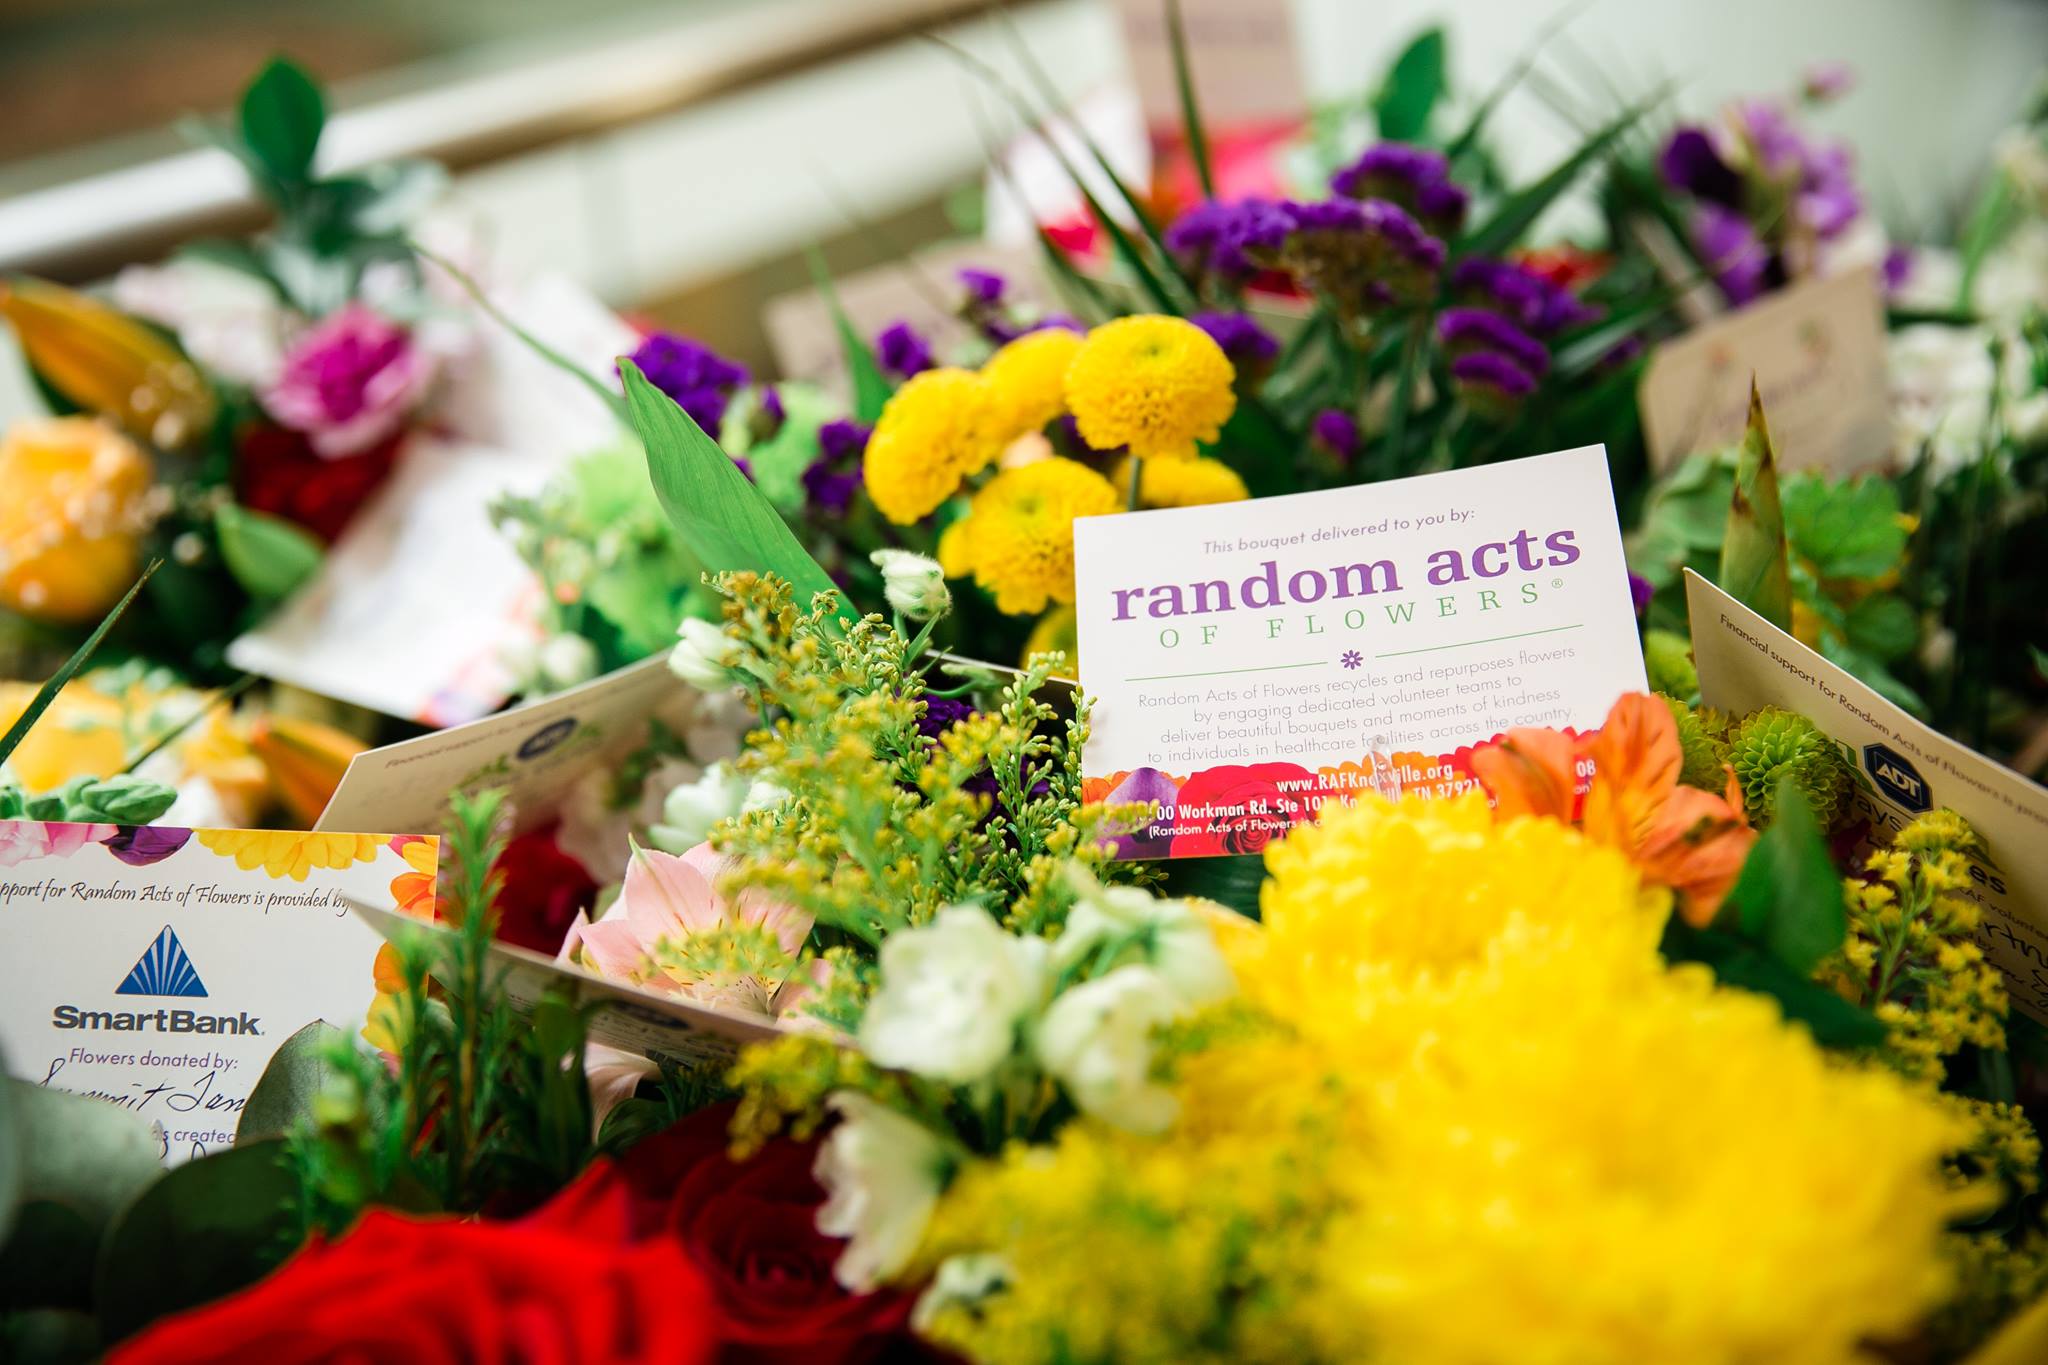 Flower arrangements with Random Acts of Flowers delivery cards